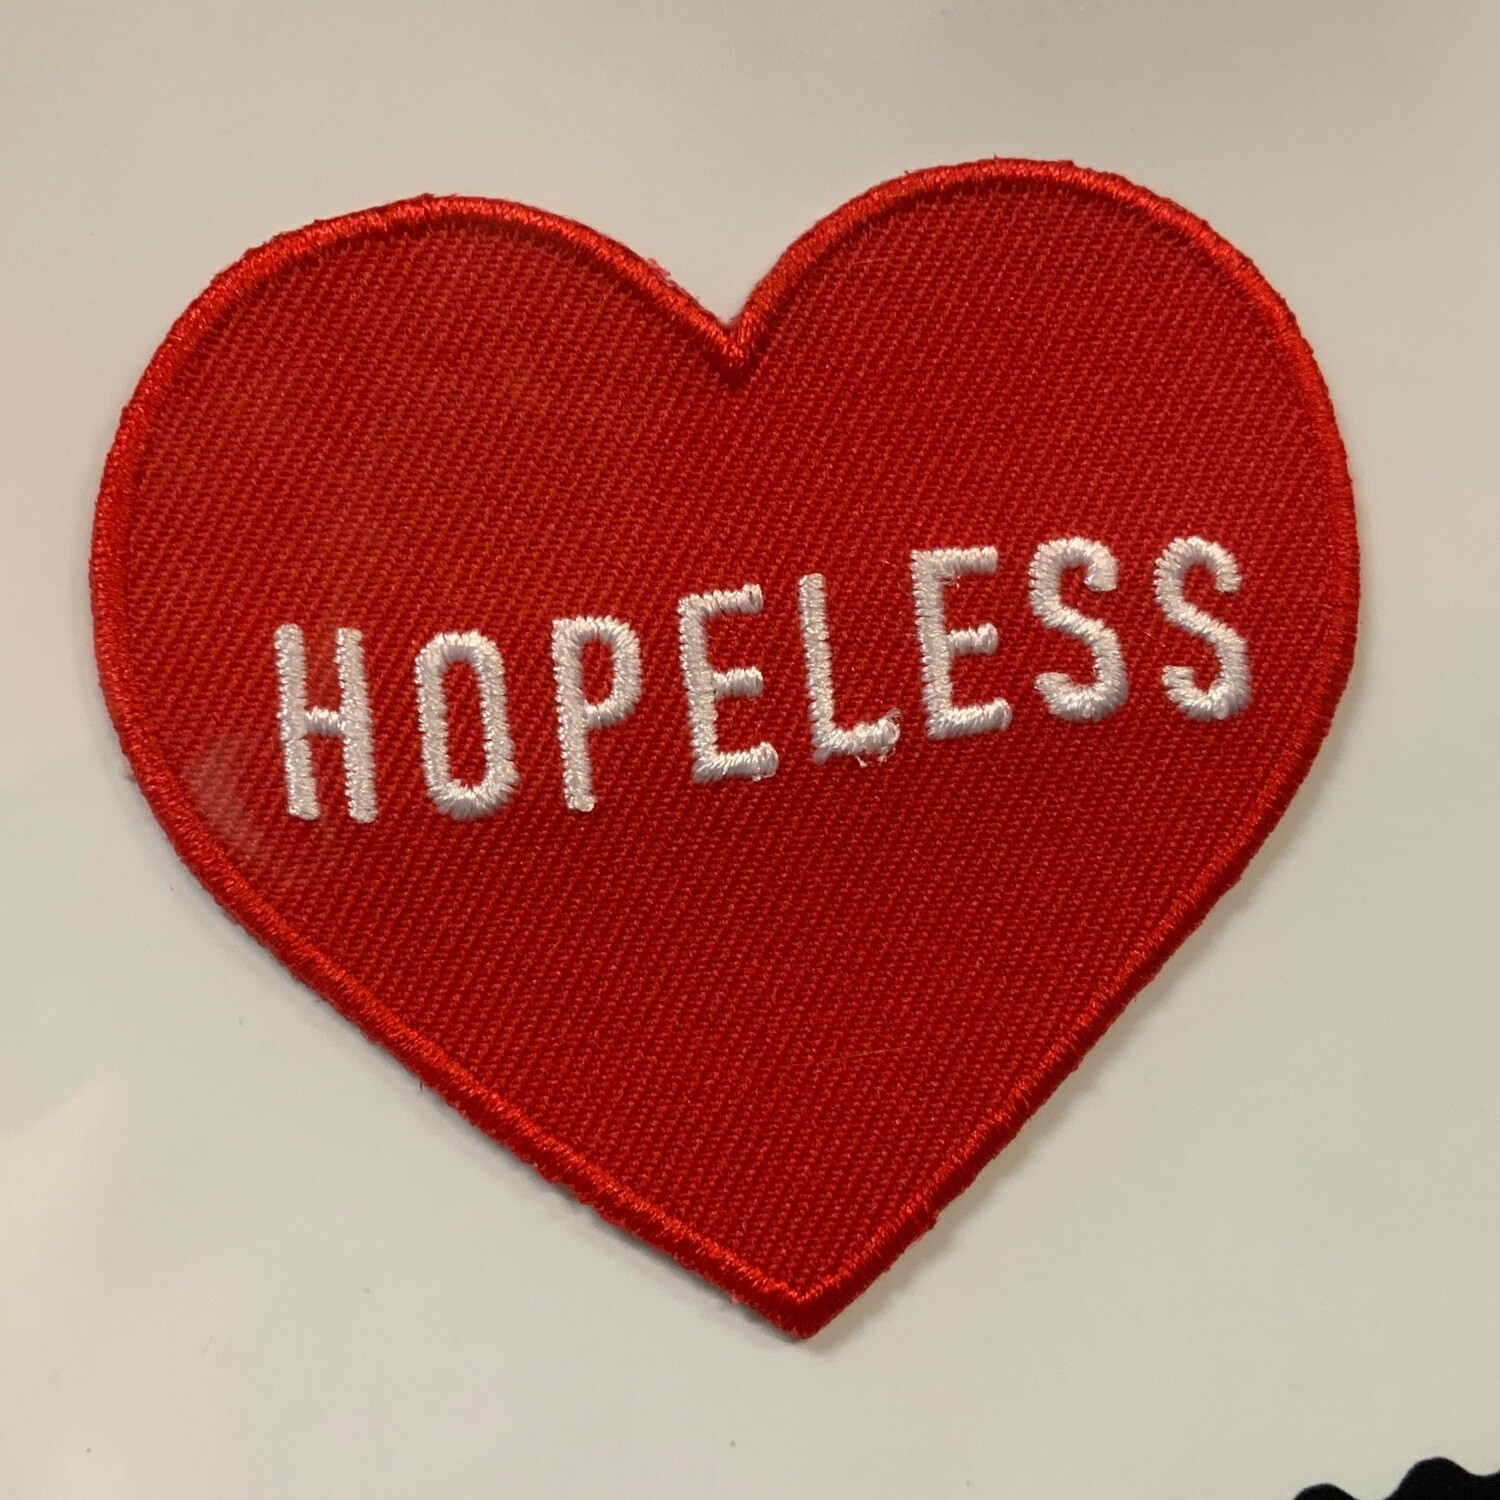 Hopeless Heart - Embroidered Patch from These Are Things